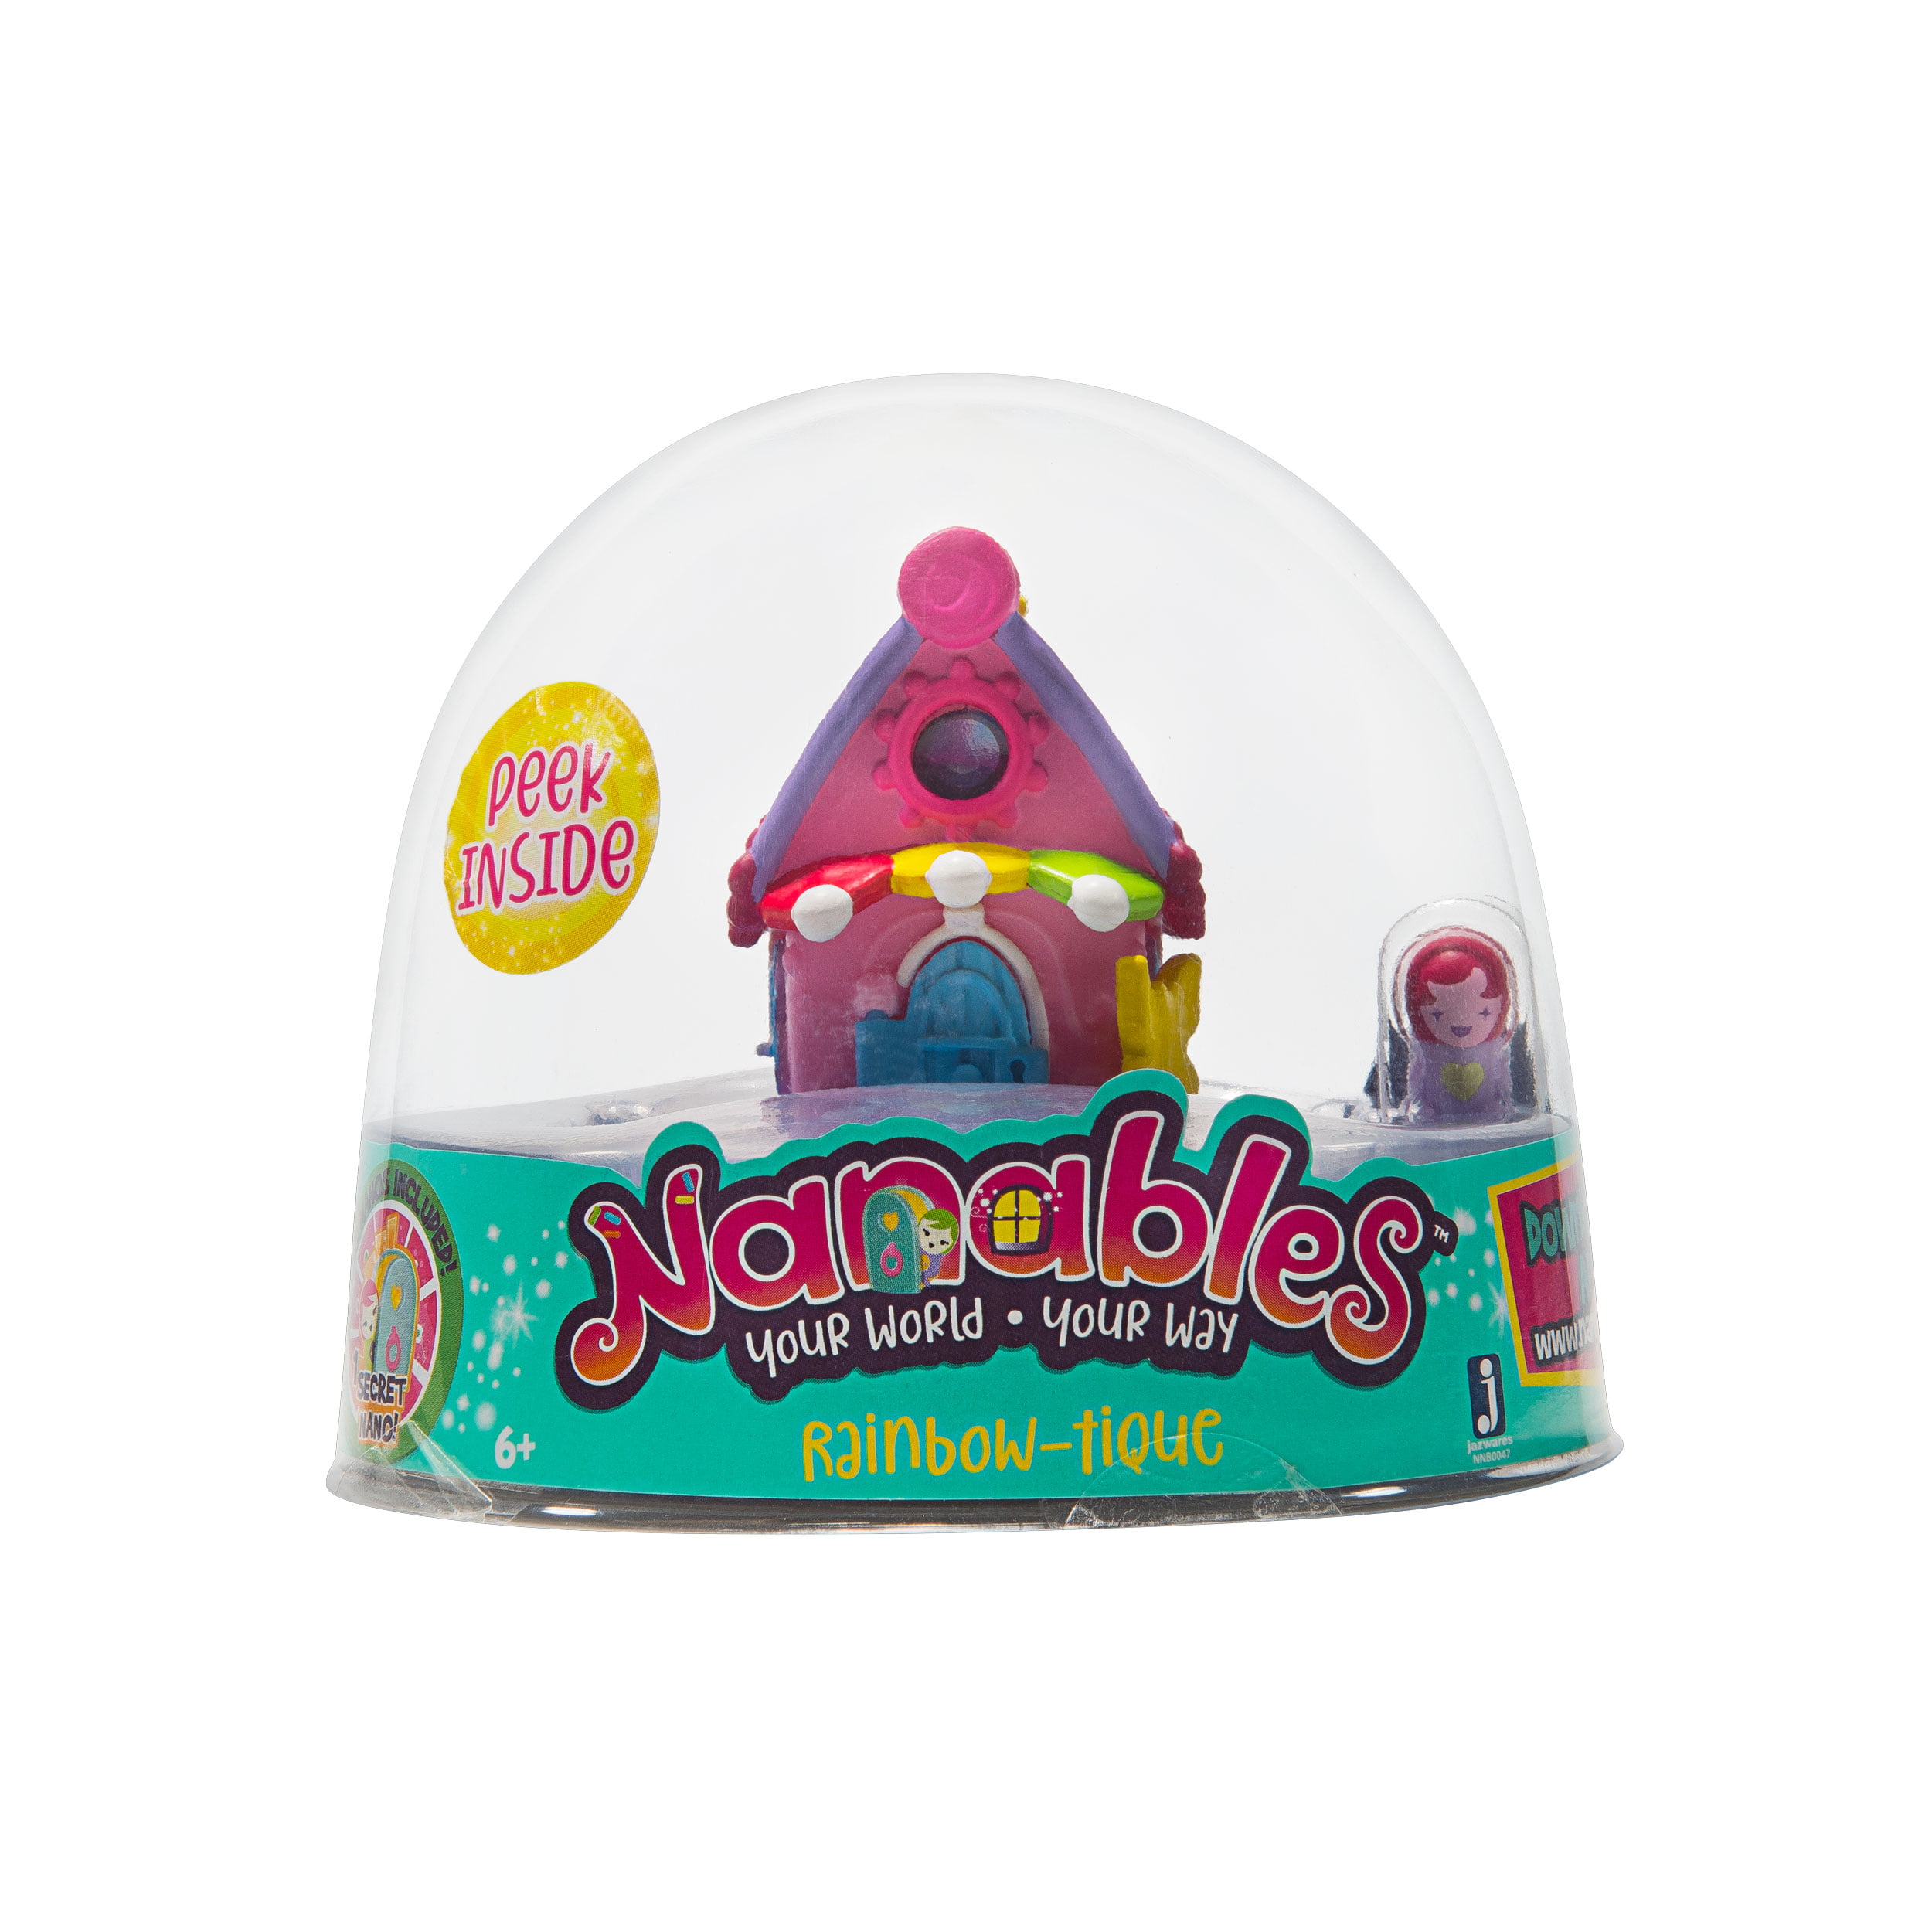 Details about   Nanables Your World Your Way Sparkle Day Spa New Rainbow Unicorn Mini House 2019 